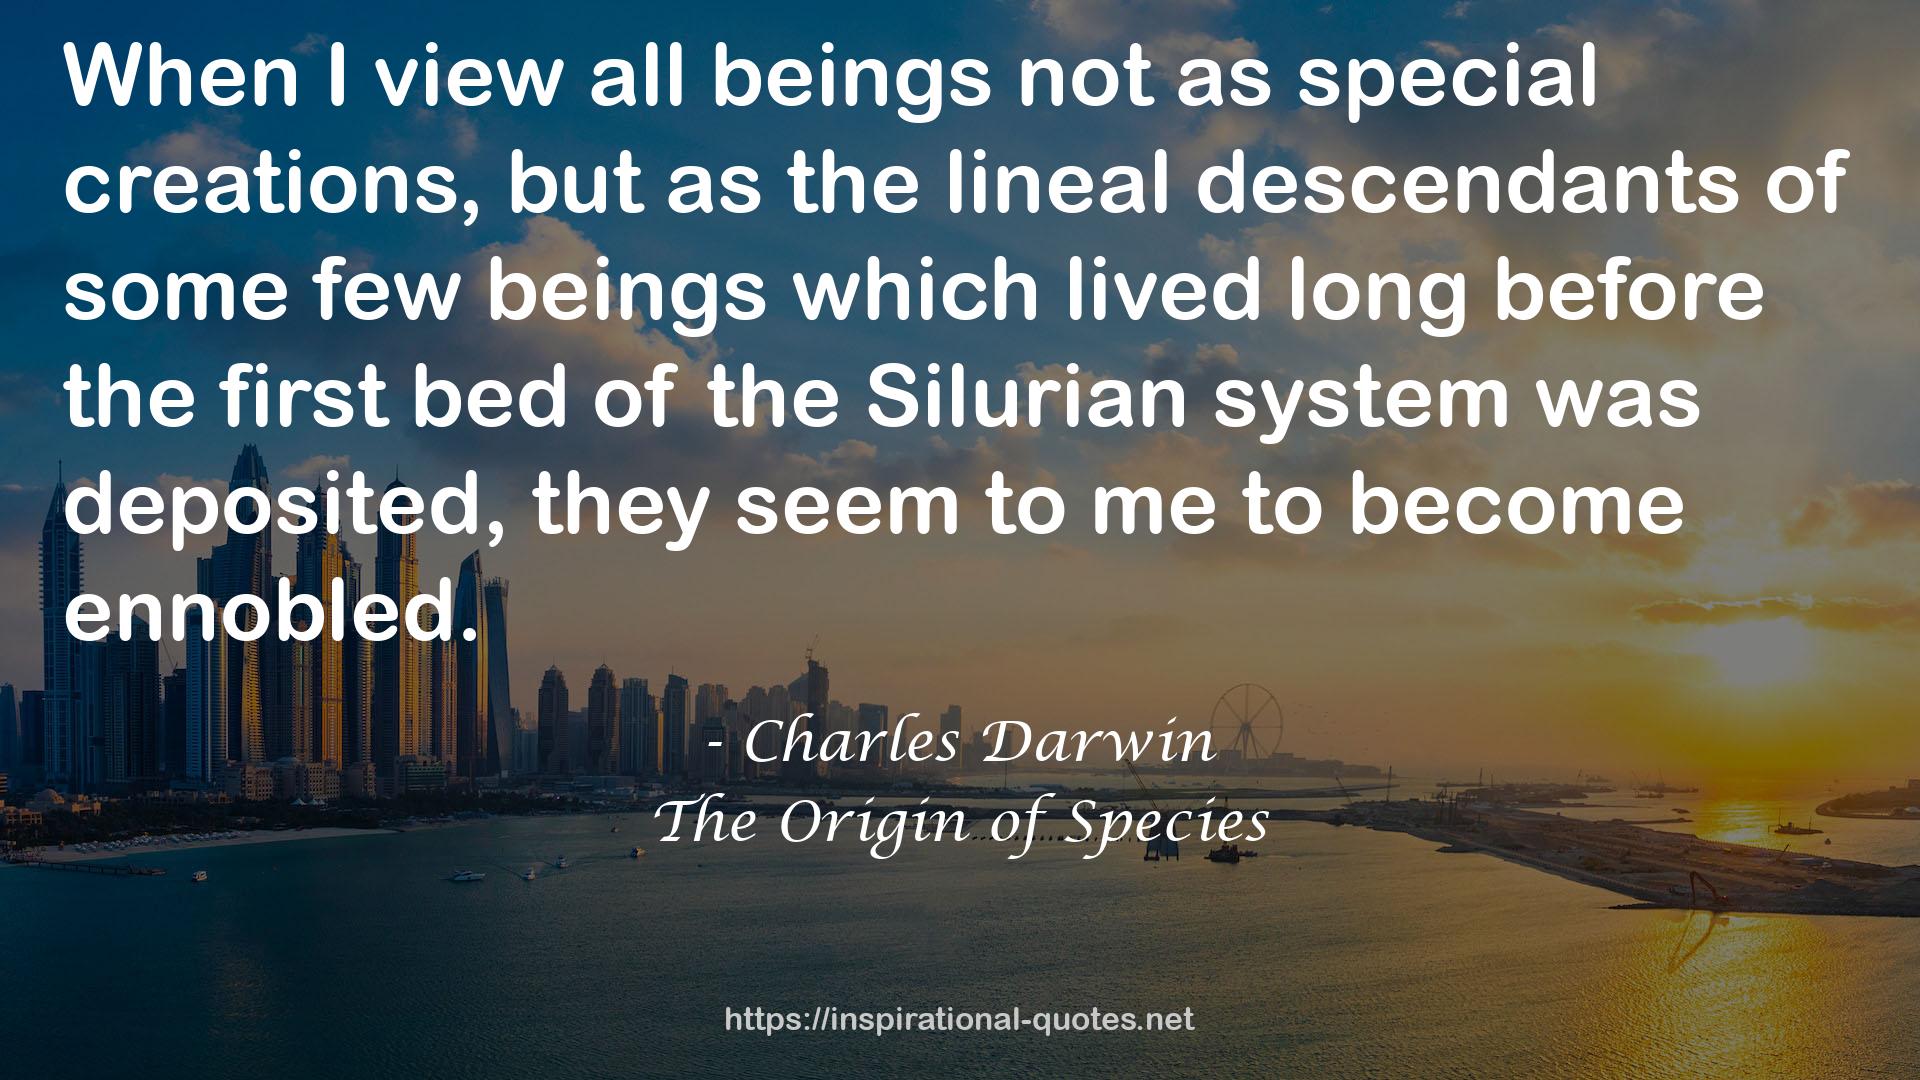 the Silurian system  QUOTES